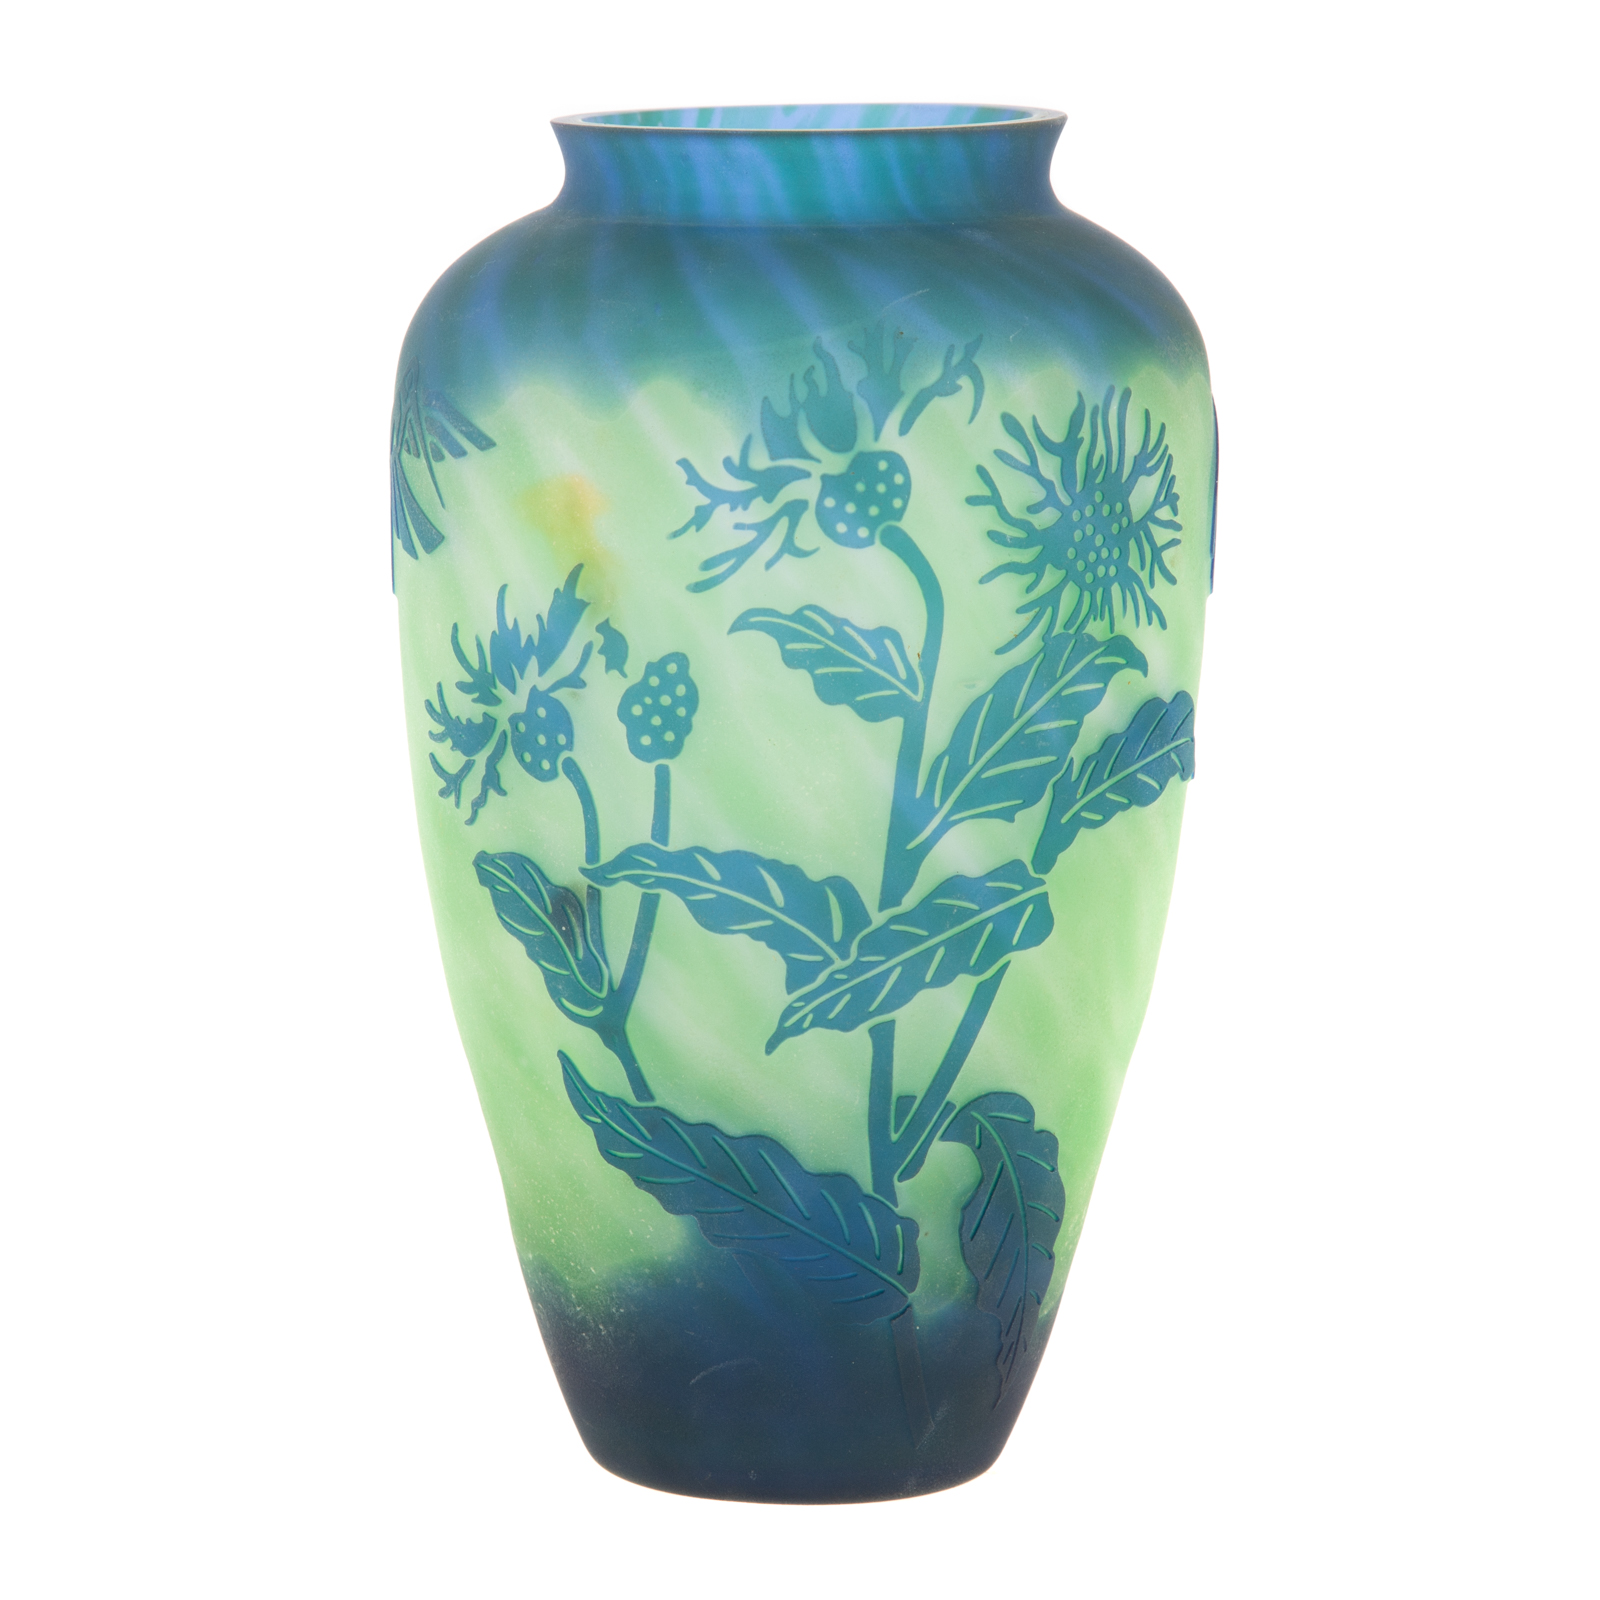 CONTINENTAL ACID ETCHED CAMEO VASE 2e91ac